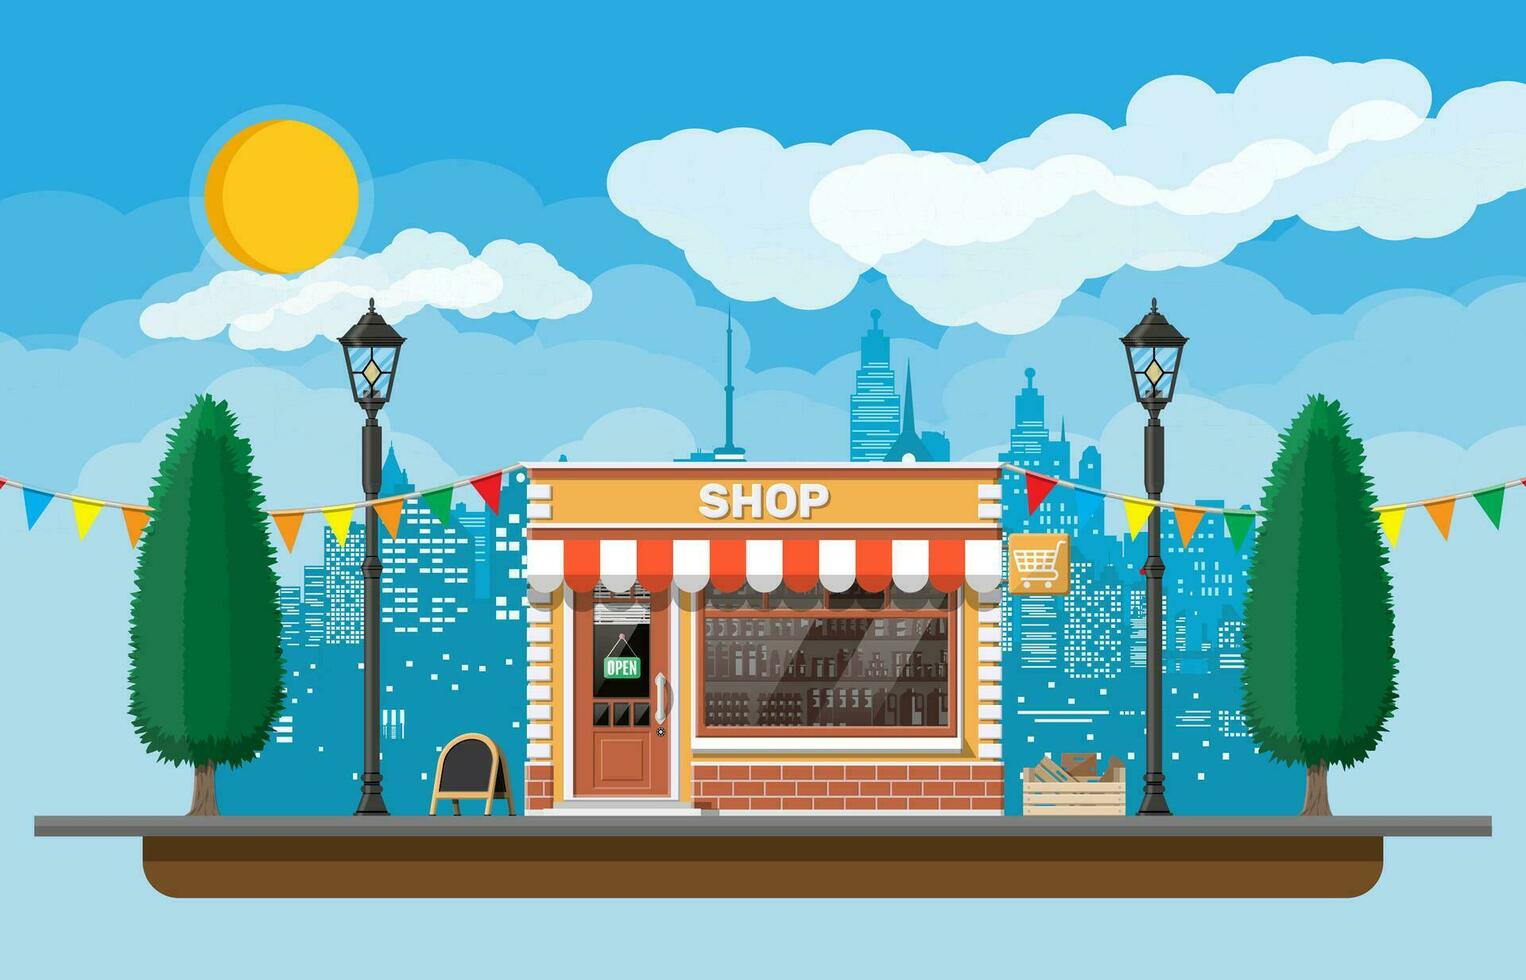 Empty store front with window and door. Glass showcase, small european style shop exterior. Commercial, property, market or supermarket. City park, street lamp and trees. Flat vector illustration